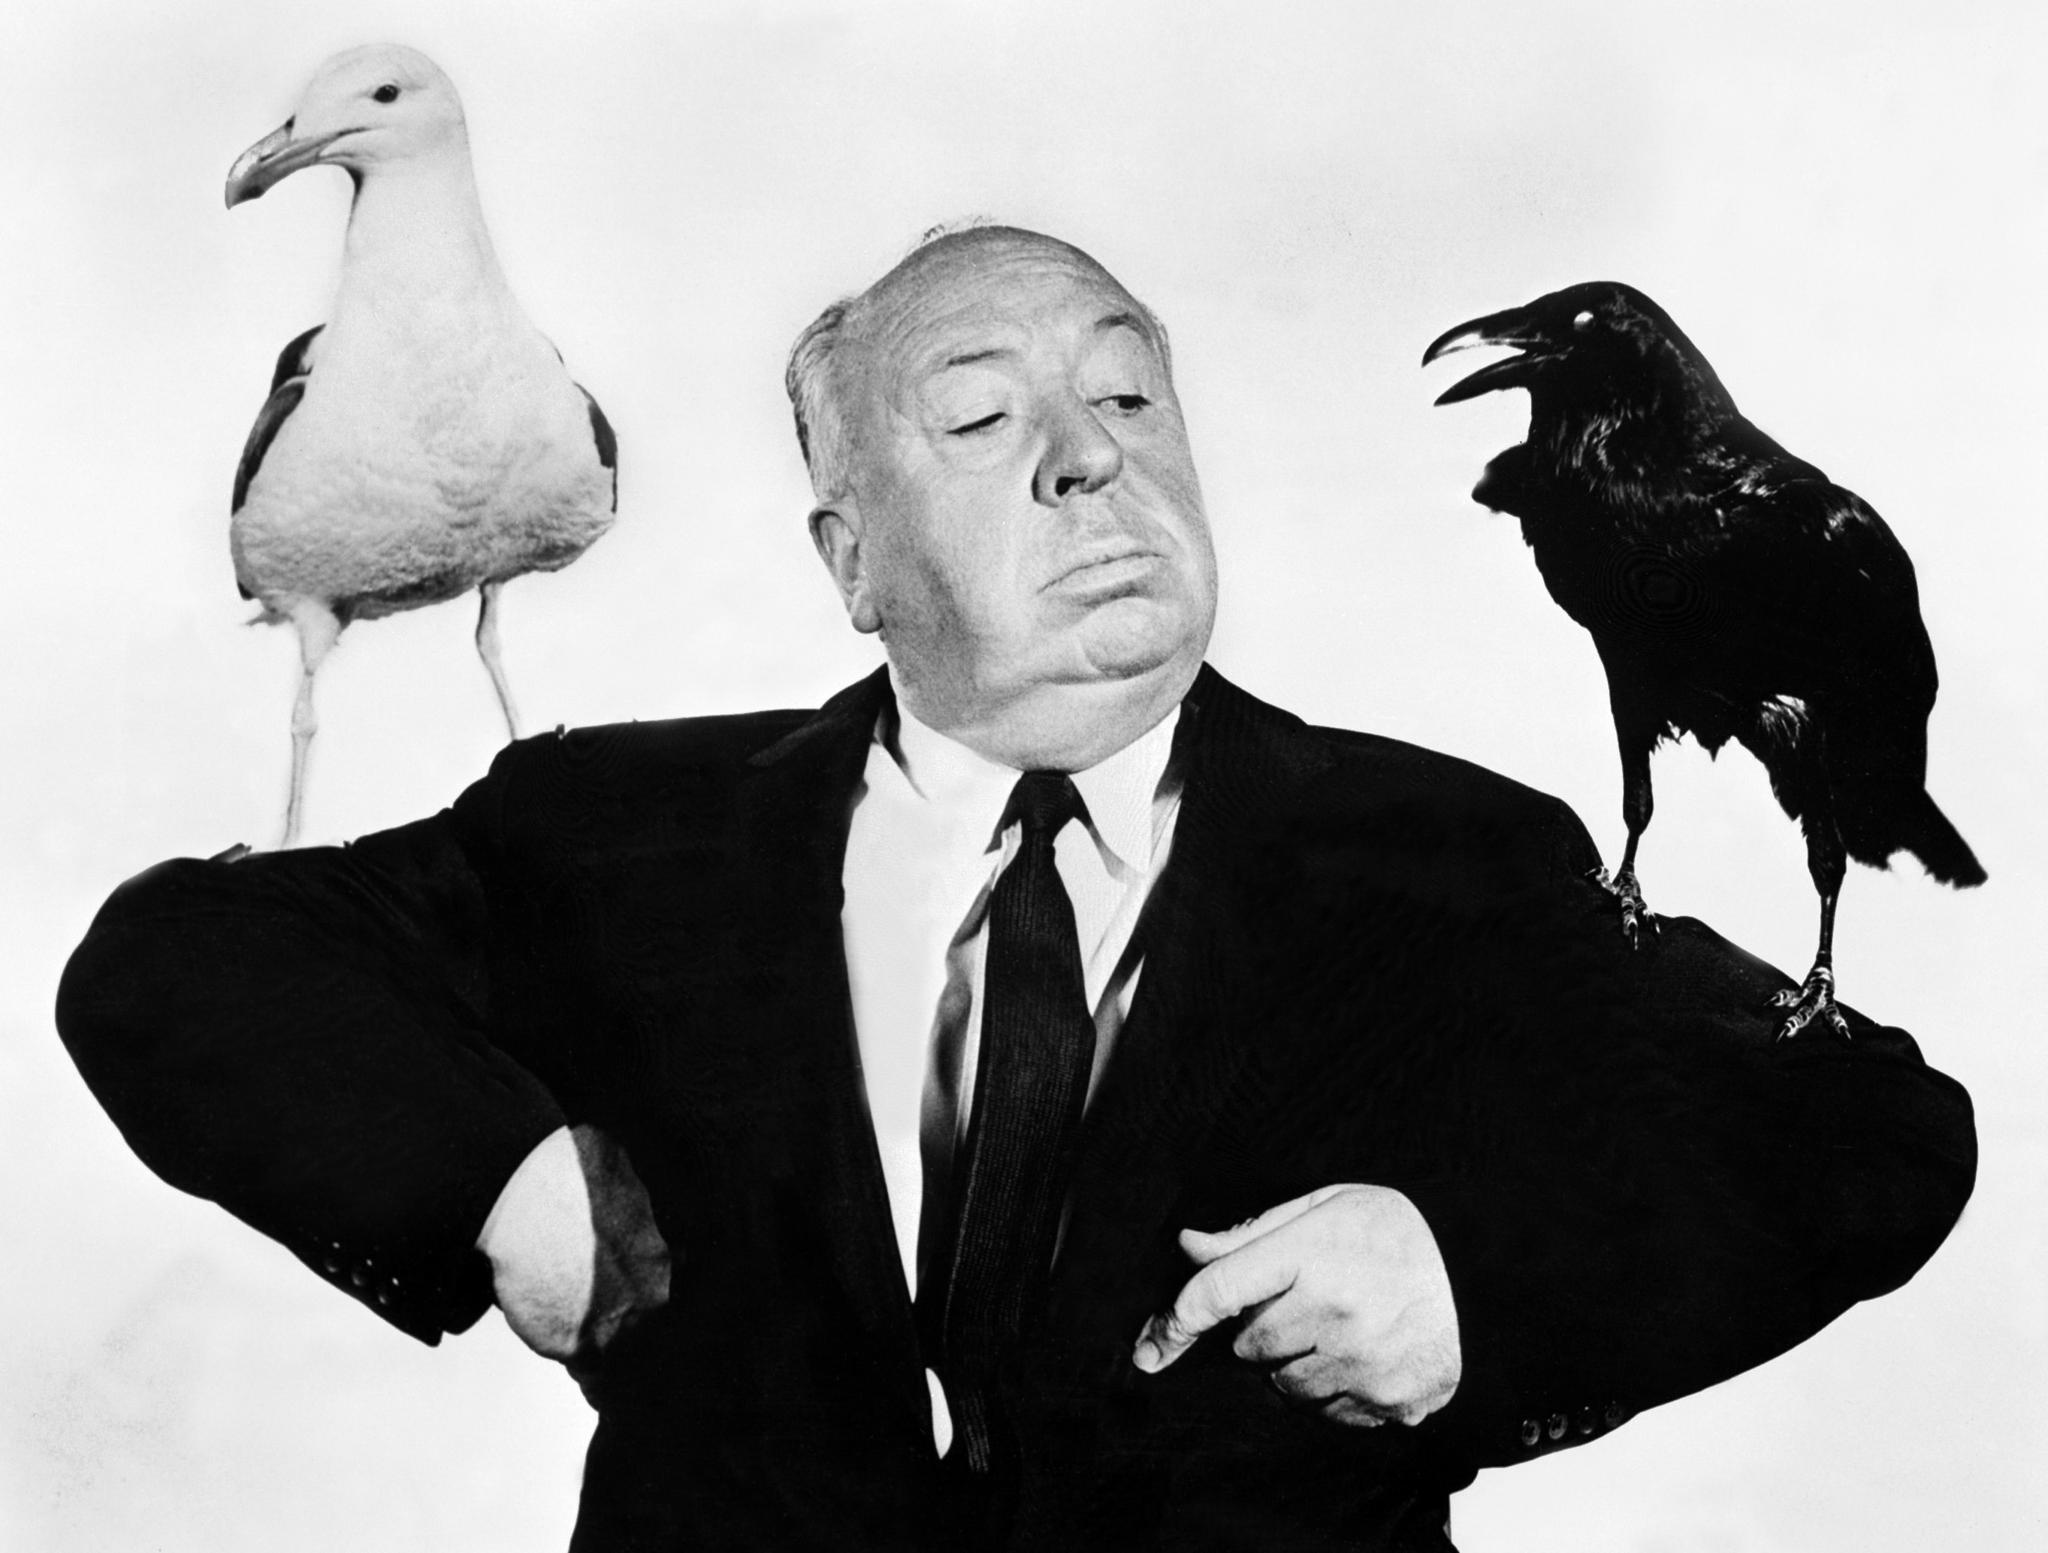 ORG XMIT: S11ABC5EB_WIRE (FILES) File picture taken in 1963 shows British film director Alfred Hitchcock (1899-1980) during the shooting of his movie 'The Birds'. Hitckcock directed his first film in 1925 and rose to become the master of suspense, internationally recognized for his intricate plots and novel camera technique. Hollywood will celebrate 13 August 1999 the centenary of Hitchcock's birth. AFP PHOTO FILES IMF25 09102004xMOVIES 10072005xGuidelive